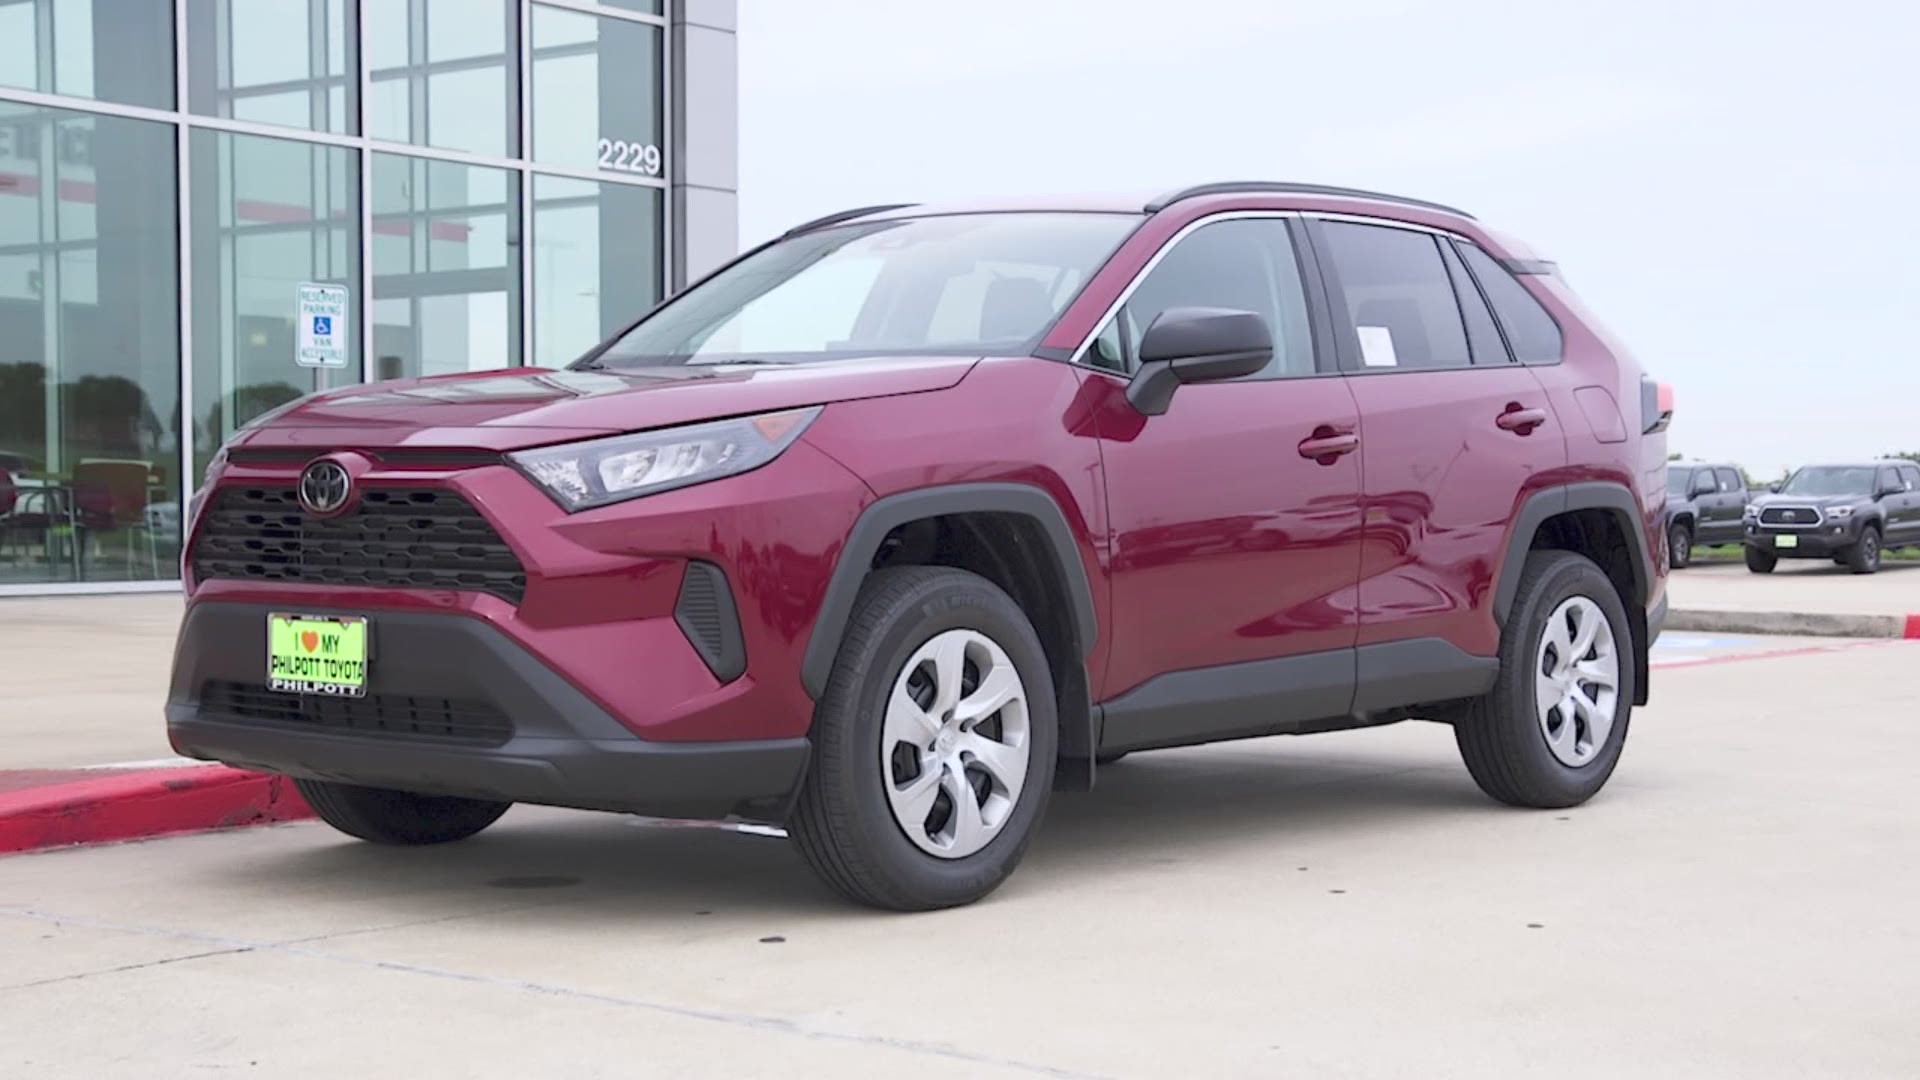 We're test driving a 2019 Toyota Rav 4 LE from Philpott Toyota in Nederland. Call (409) 853-3800 or visit PhilpottToyota.com to get yours.